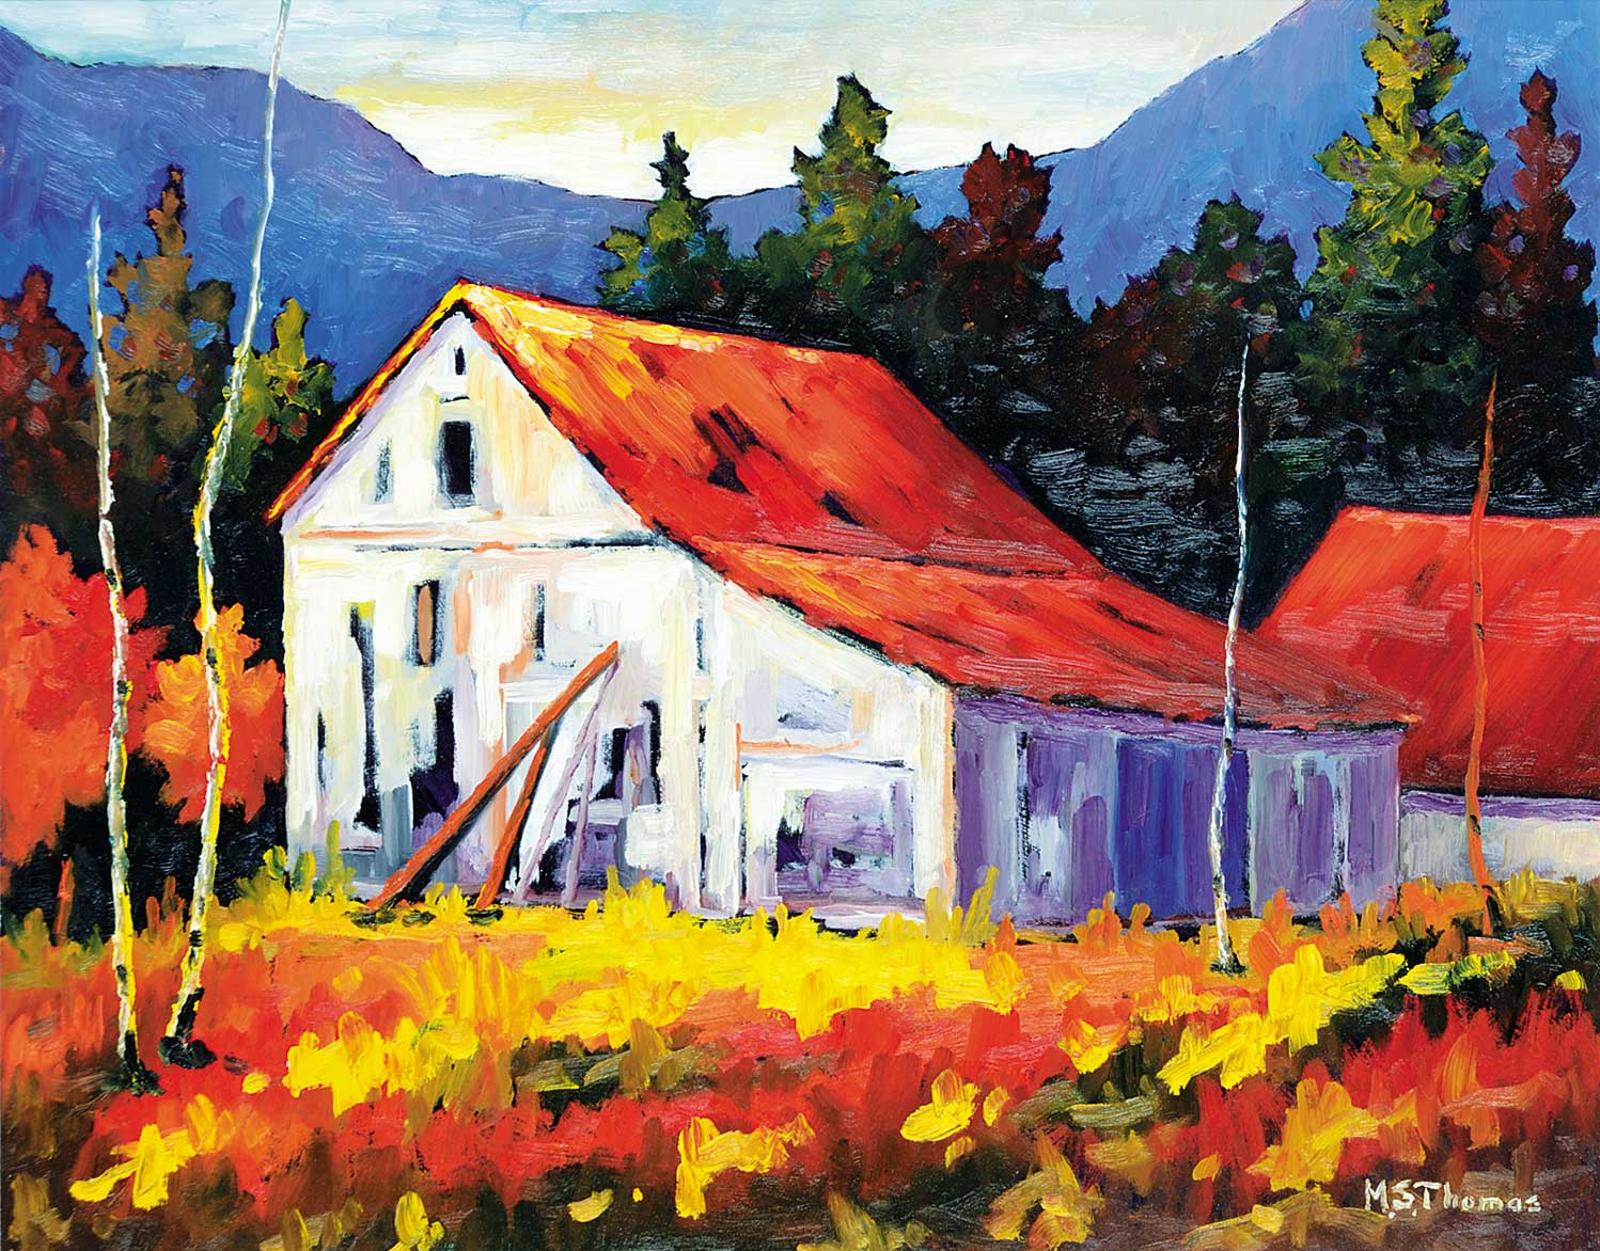 M. Shirley Thomas - Untitled - Red Roof in the Foothills